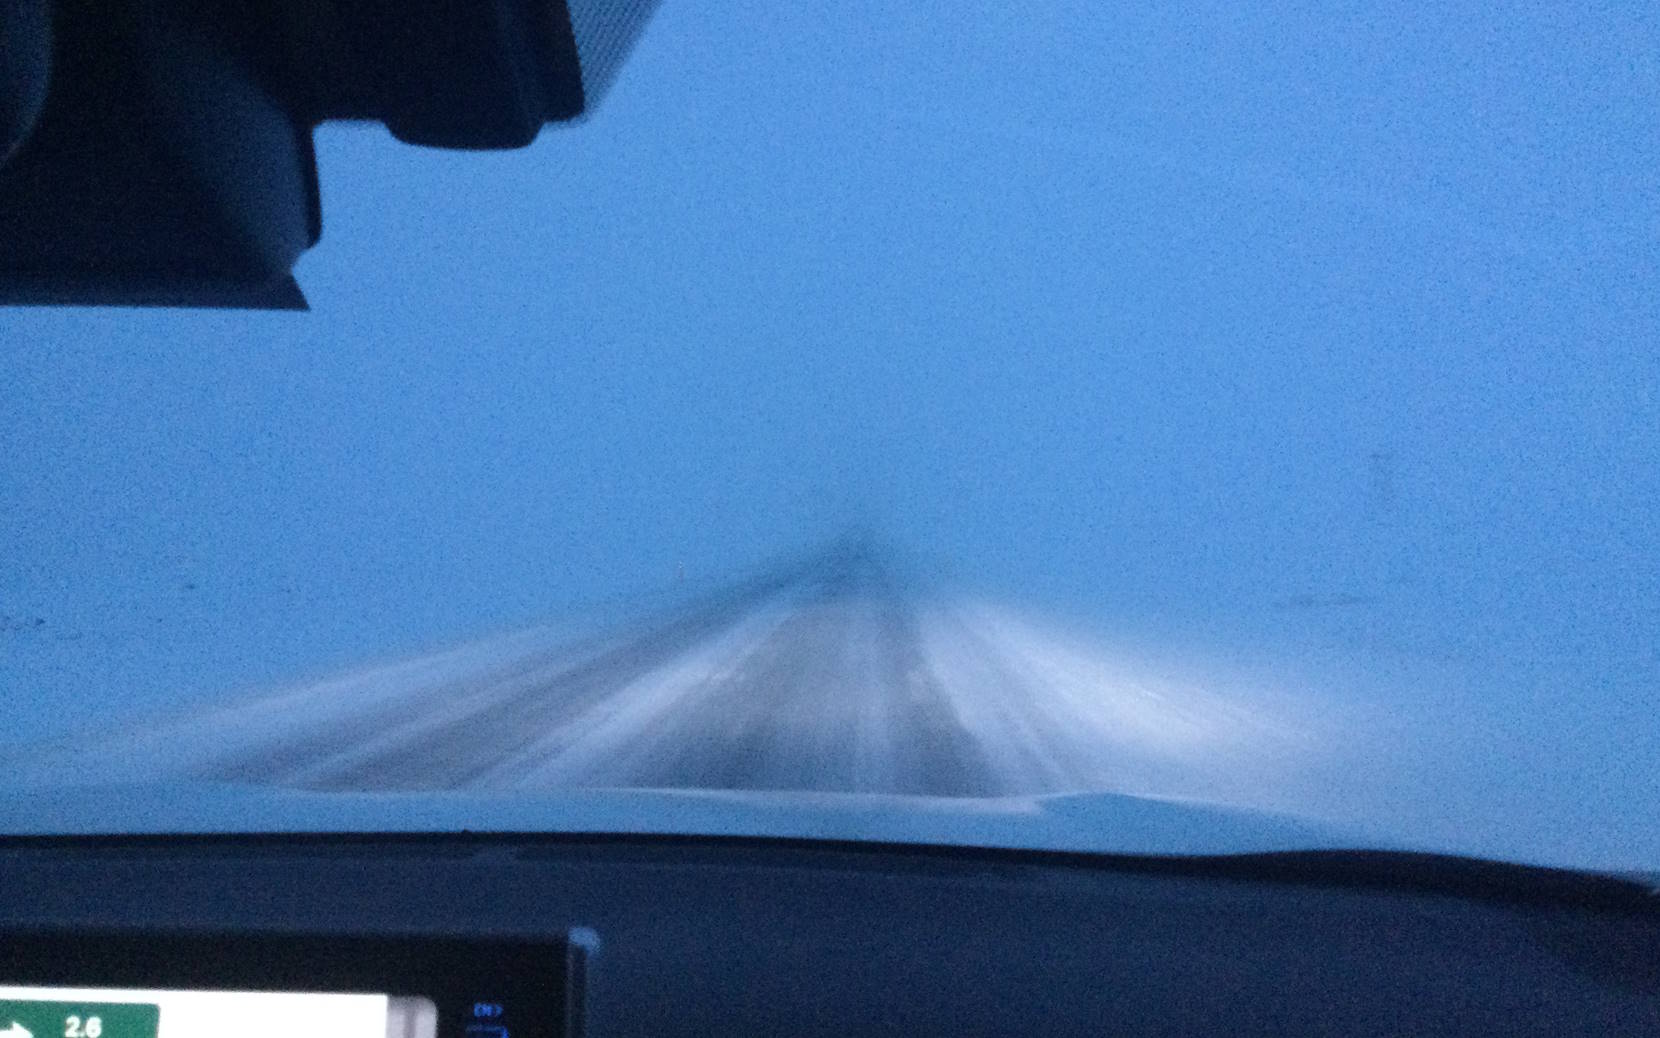 Near-whiteout conditions on an Icelandic road.